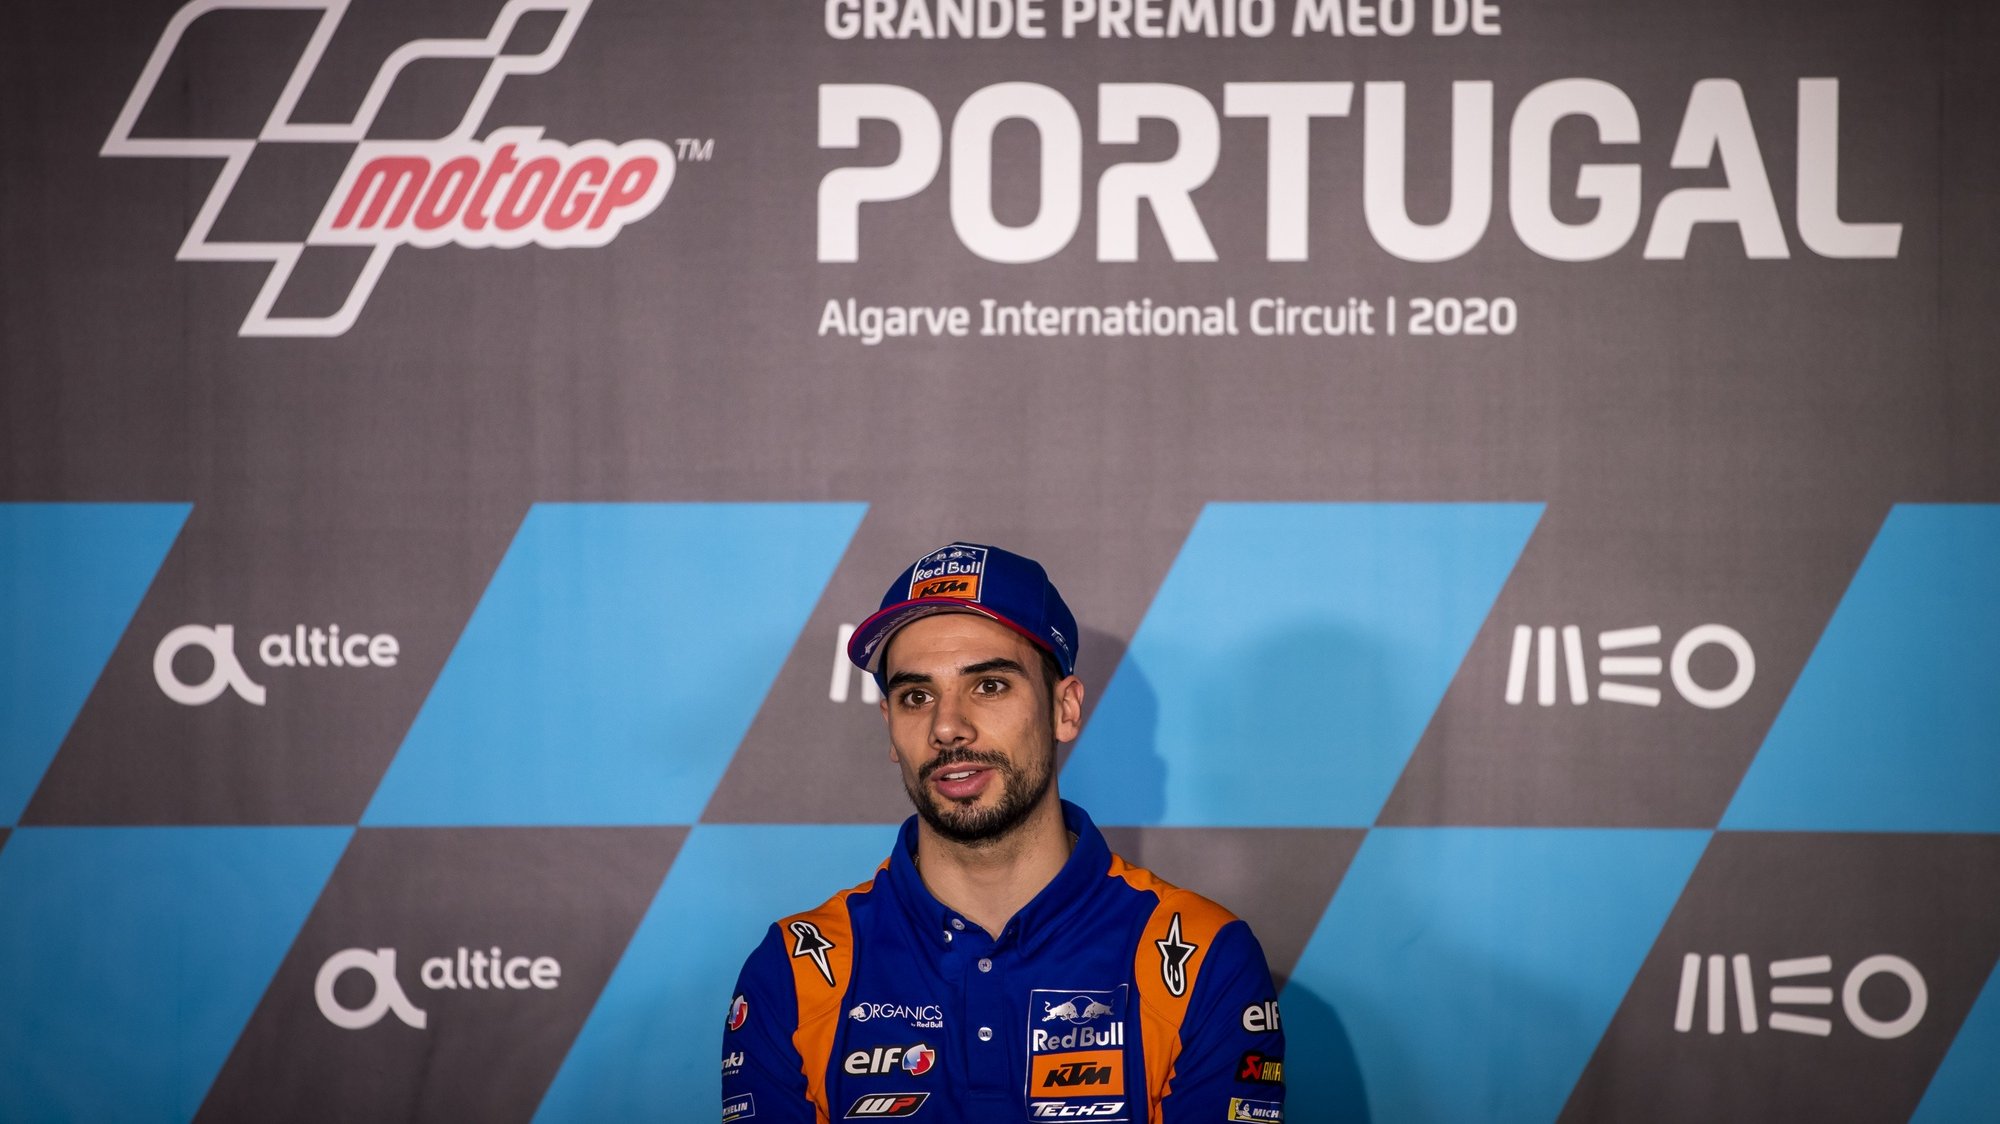 Portuguese rider Miguel Oliveira of the KTM Tech3 team attends a press conference at the Motorcycling Grand Prix of Portugal at Algarve International race track, south of Portugal, 19 November 2020. The Motorcycling Grand Prix of Portugal will take place on 22 November 2020. JOSE SENA GOULAO/LUSA